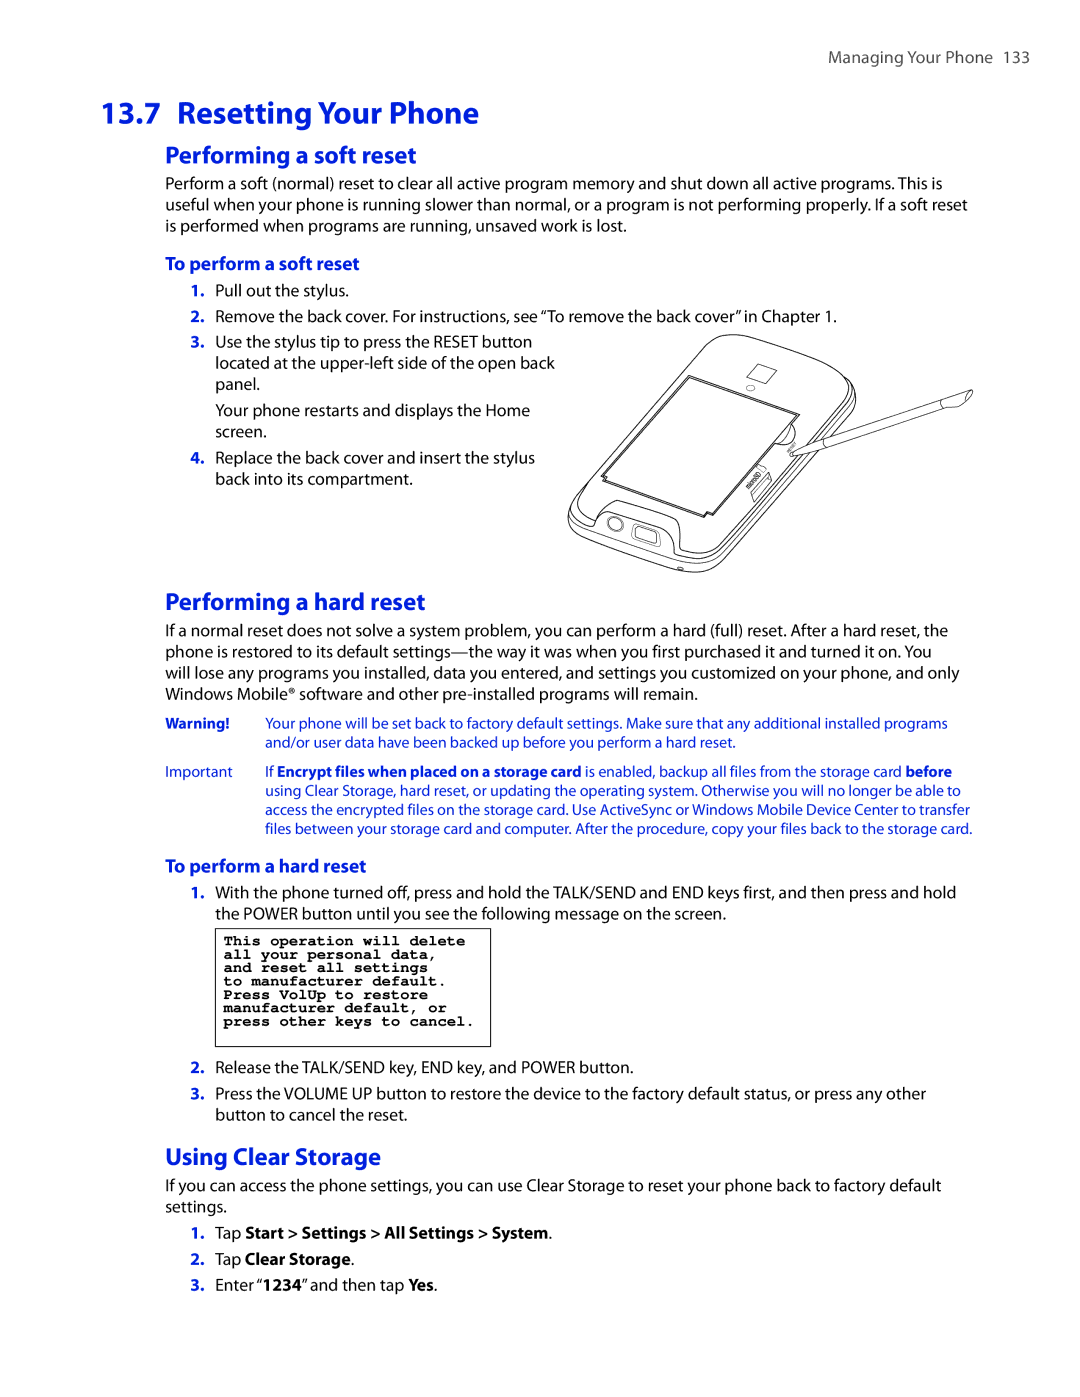 HTC TOUCHPRO2SPT user manual Resetting Your Phone, Performing a soft reset, Performing a hard reset, Using Clear Storage 